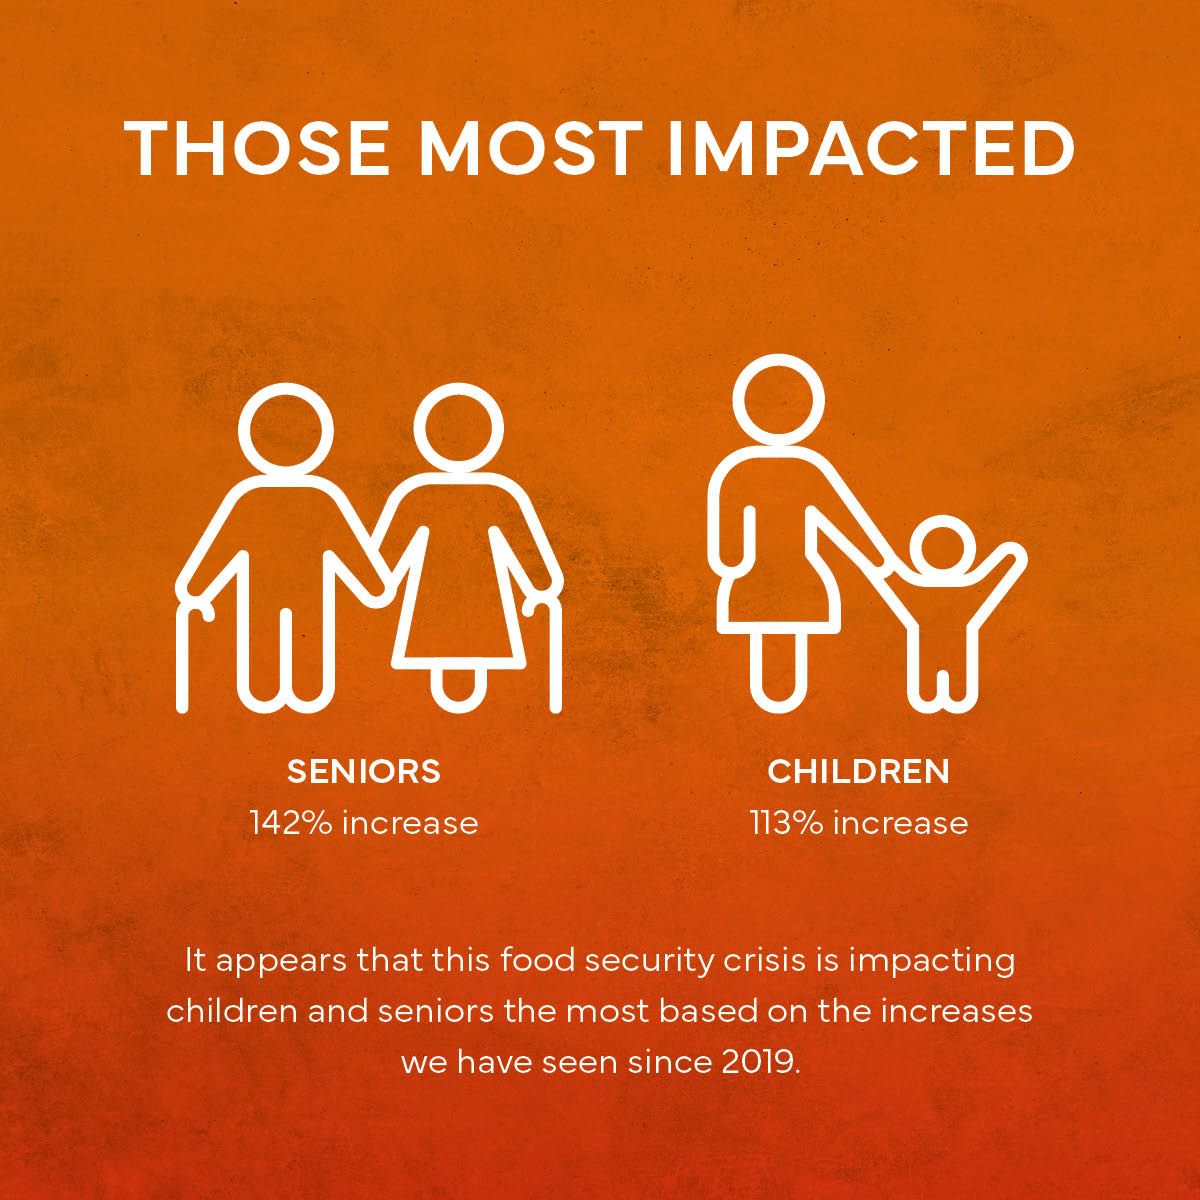 Infographic showing this food security crisis is impacting children and seniors the mosted based on increases seen since 2019 - Seniors 142% and Children 113%